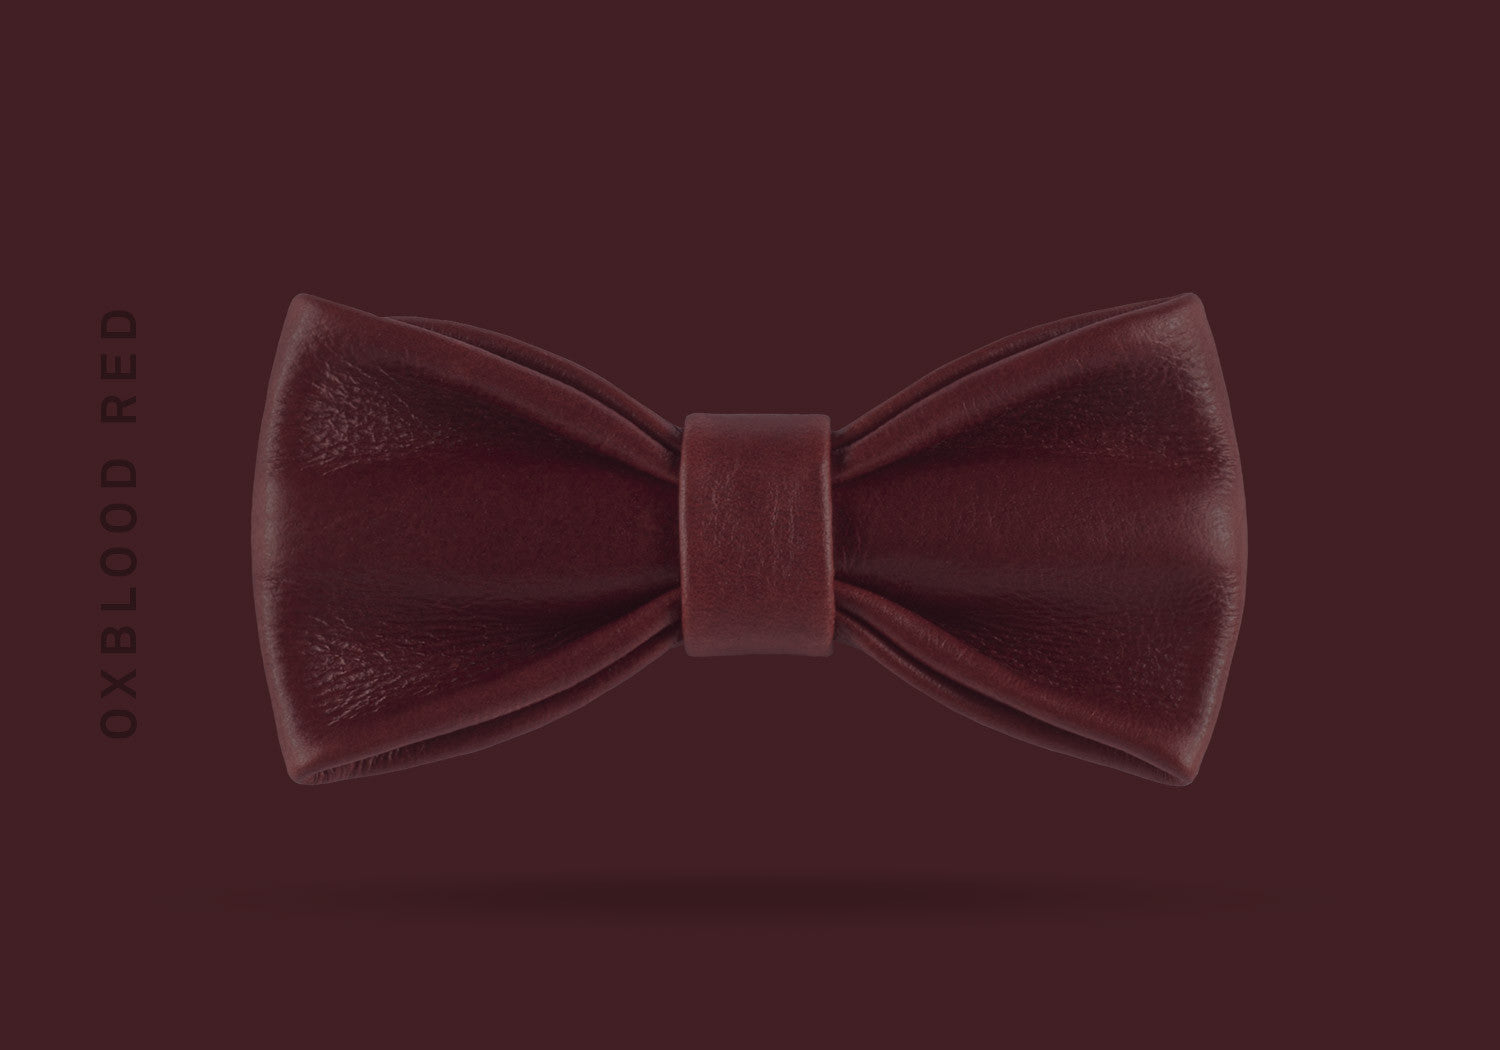 This oxblood red WEEF handmade leather bow is a great present or gift idea for dapper and stylish gentlemen for fathers day, valentines day or Christmas.